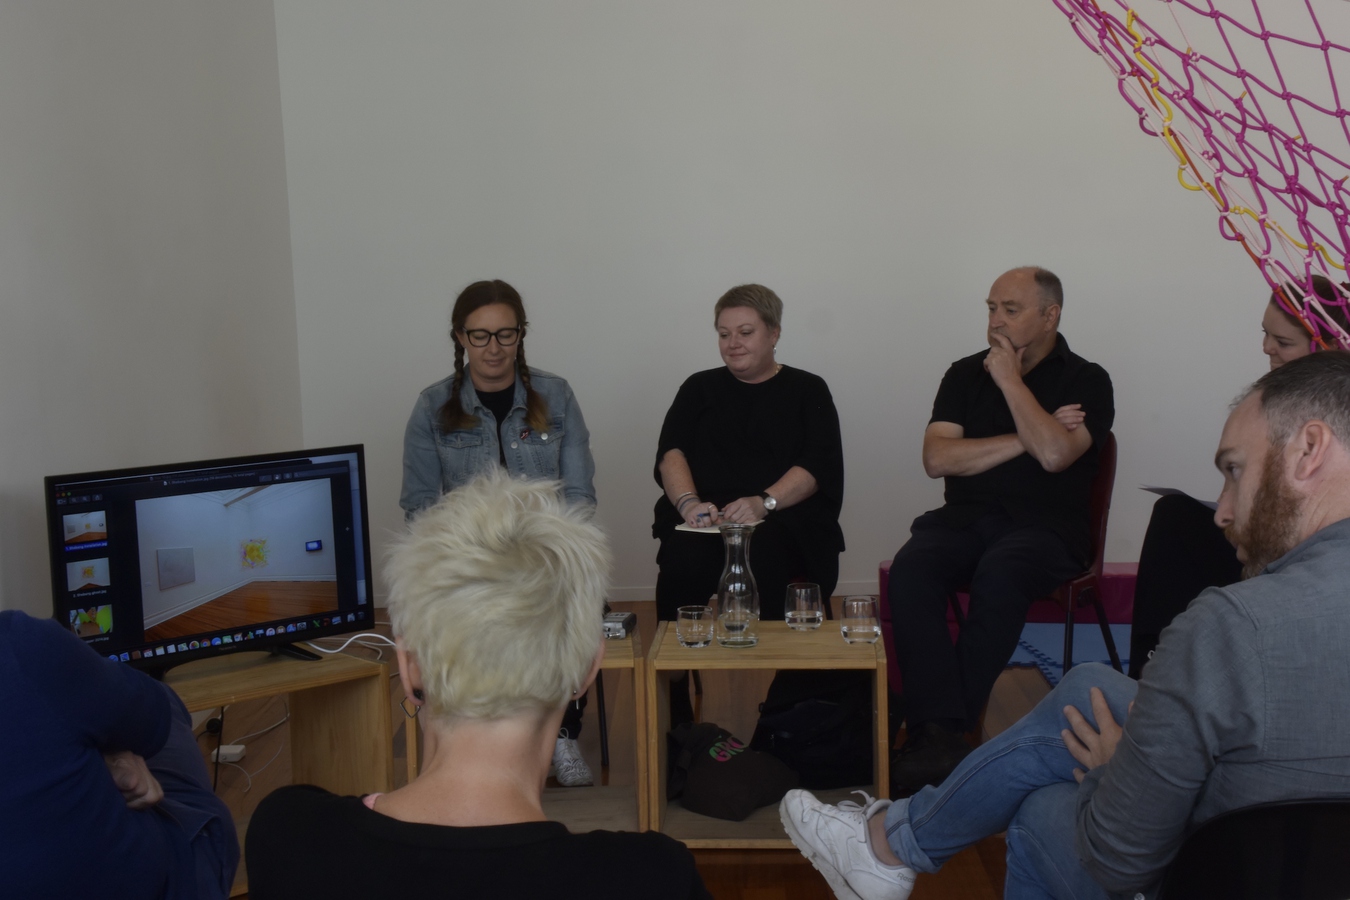 Panel discussion: After the exhibition, the lifespan of an artwork, 12 noon–1pm, Saturday 30 March. Doc Ross, Louise Palmer, and Miranda Parkes; chaired by Hope Wilson.